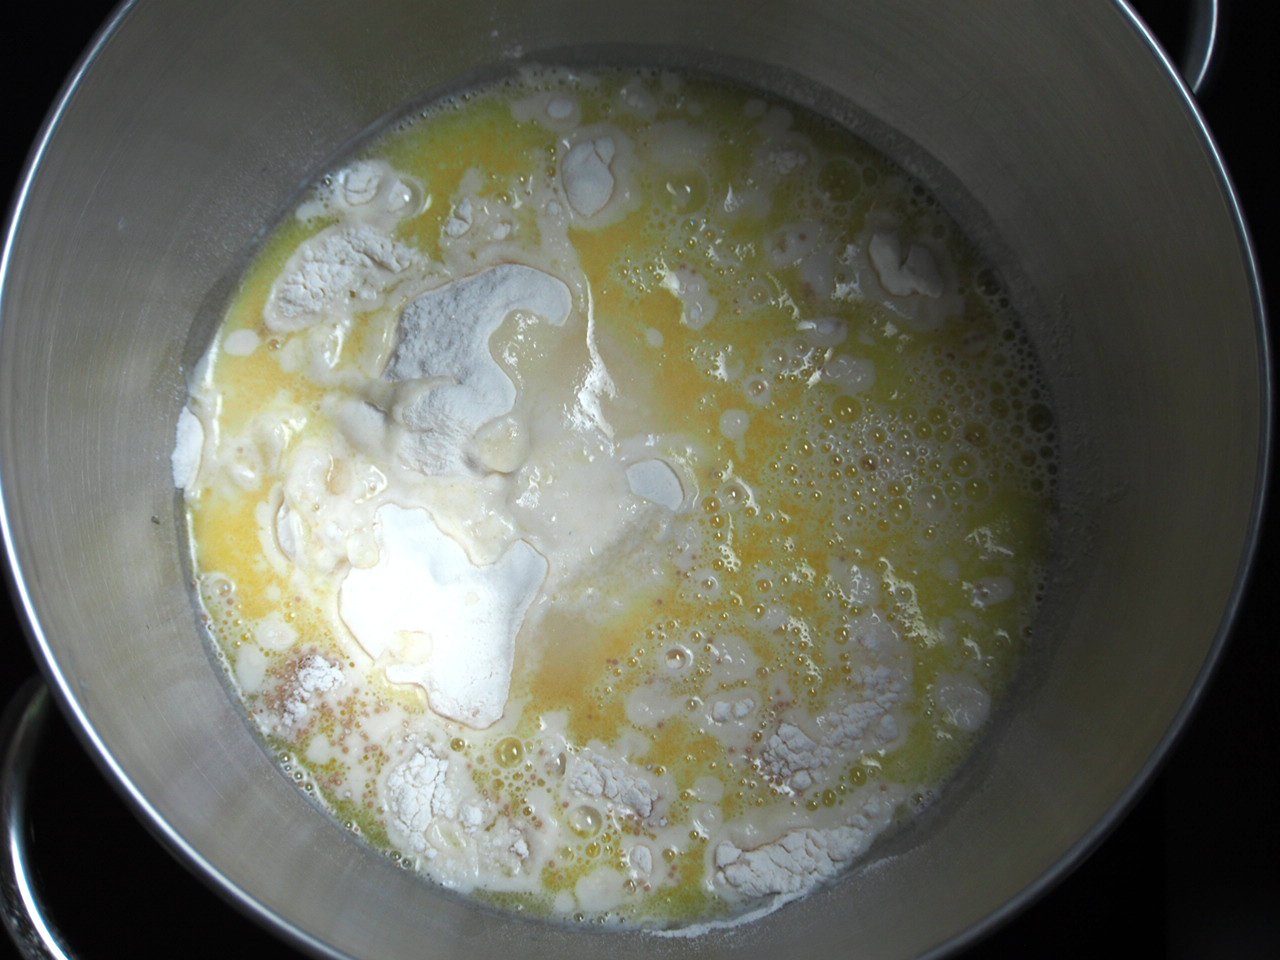 The dough for mini cinnamon rolls are being mixed in a large mixing bowl.